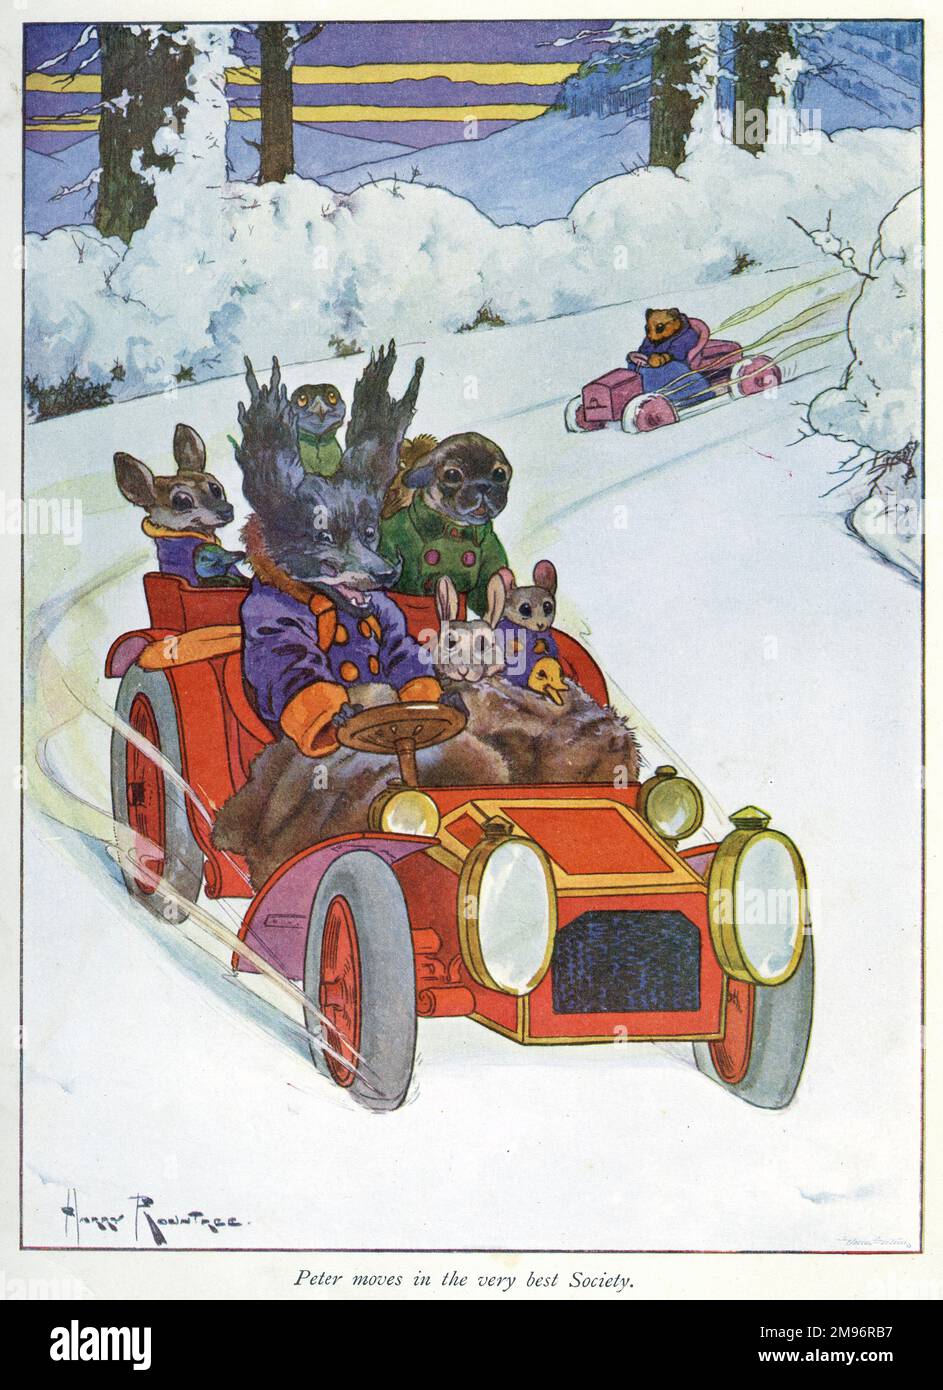 Pug Peter -- Peter moves in the very best Society.  A group of assorted animals driving through the snow in a red car. Stock Photo